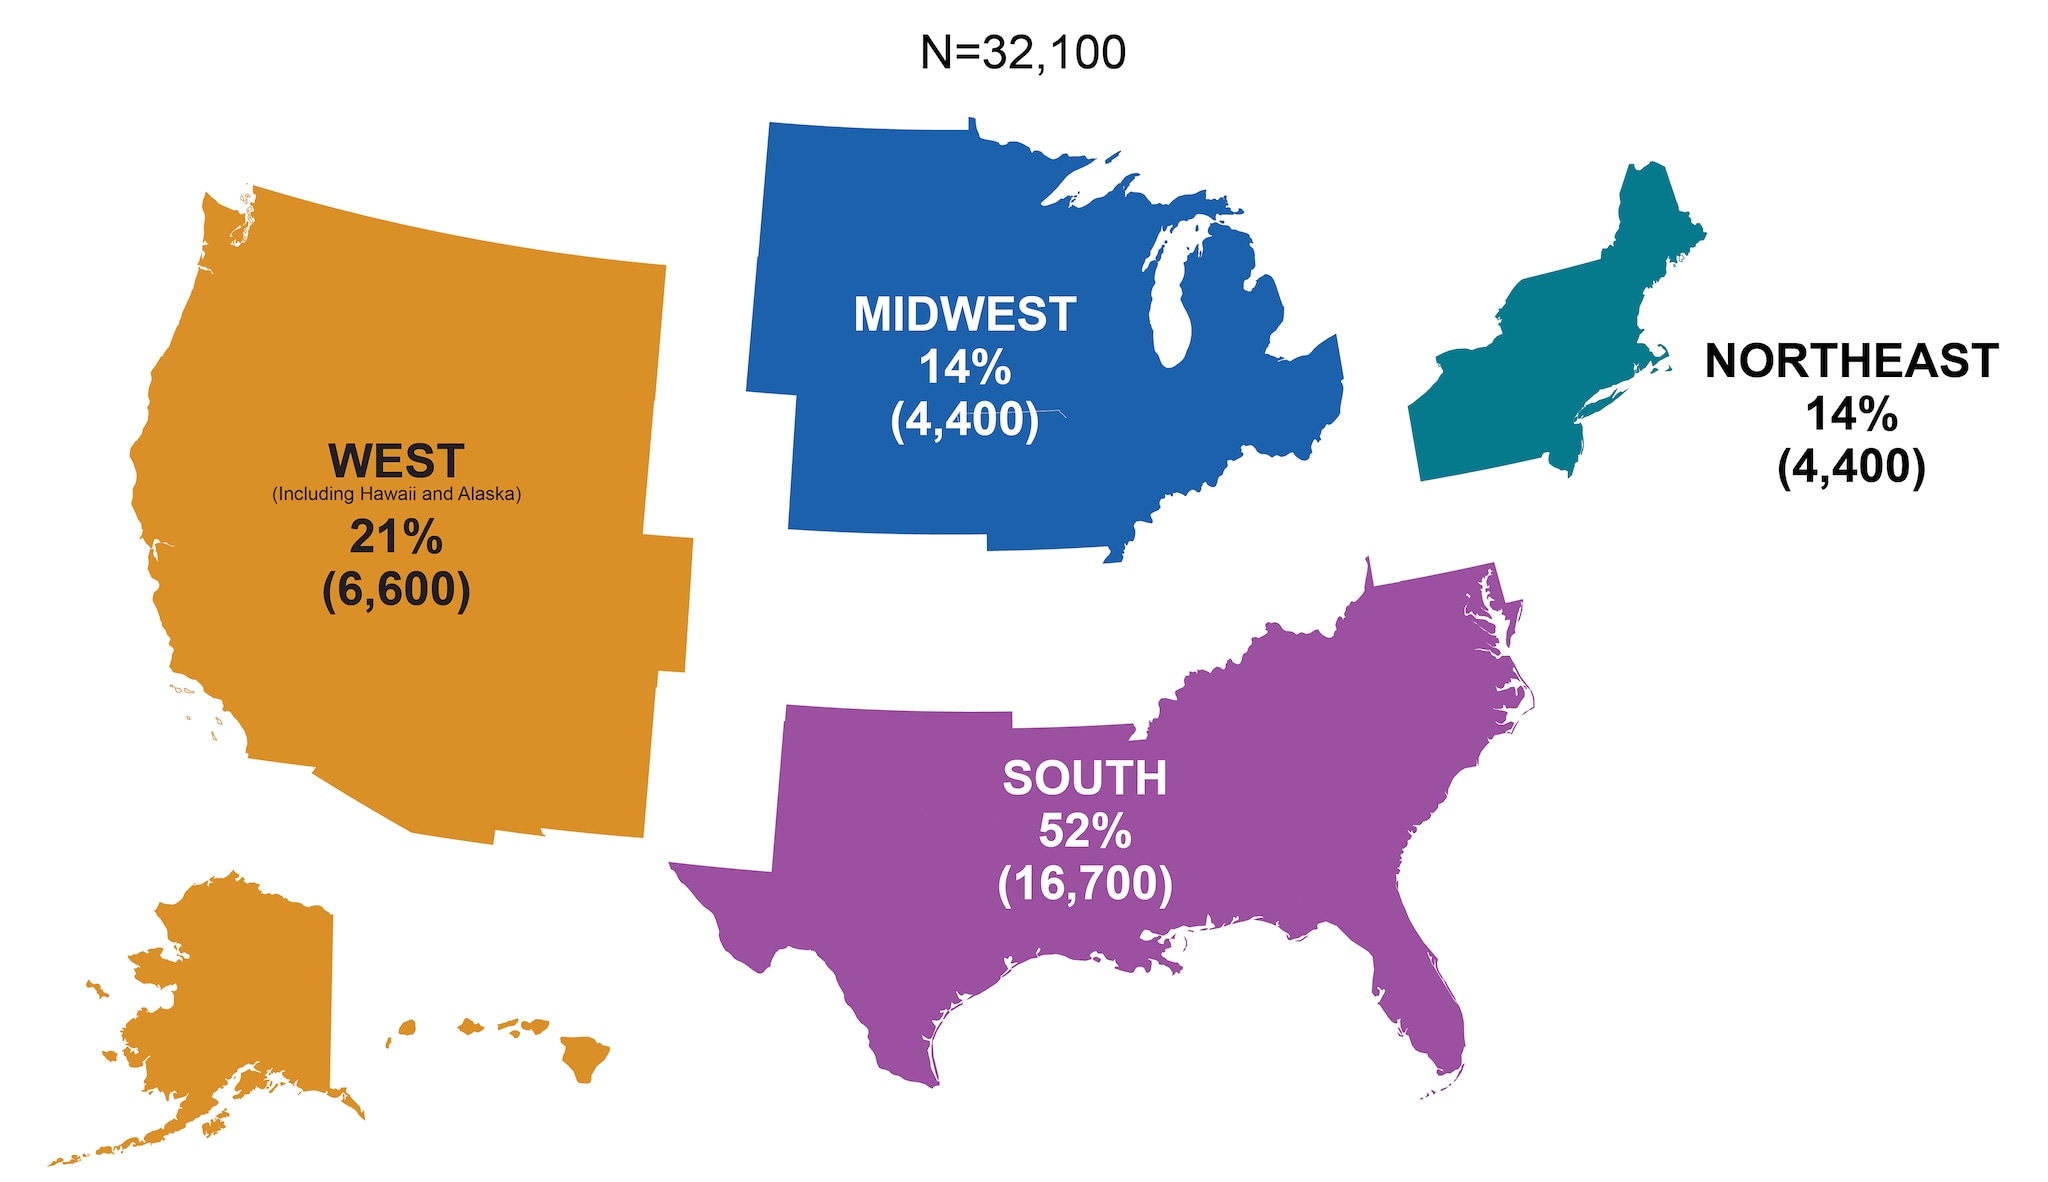 This map shows estimated new HIV infections In the US by region.